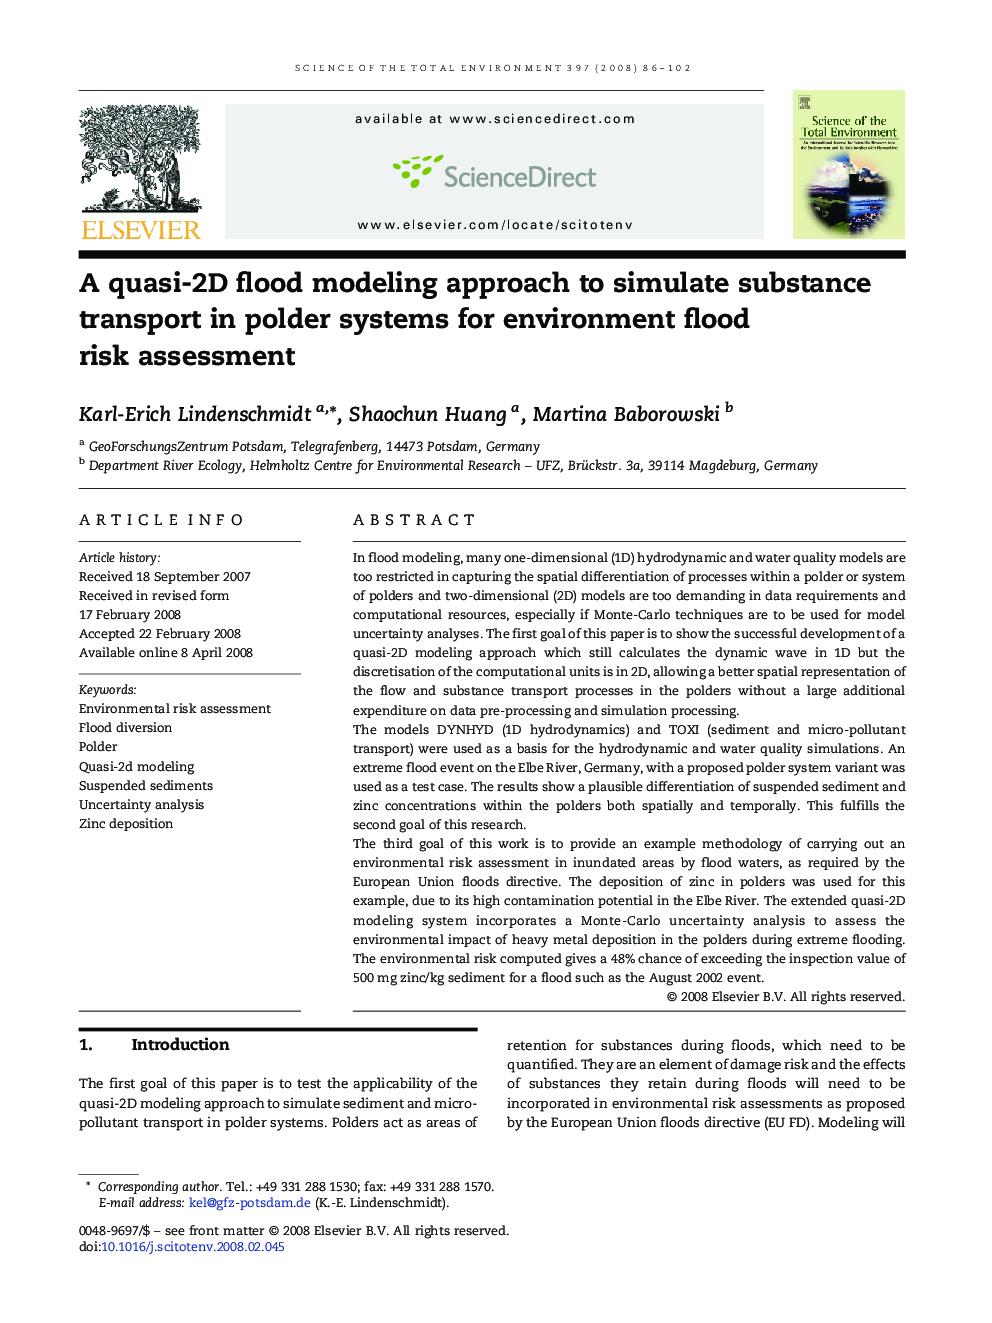 A quasi-2D flood modeling approach to simulate substance transport in polder systems for environment flood risk assessment